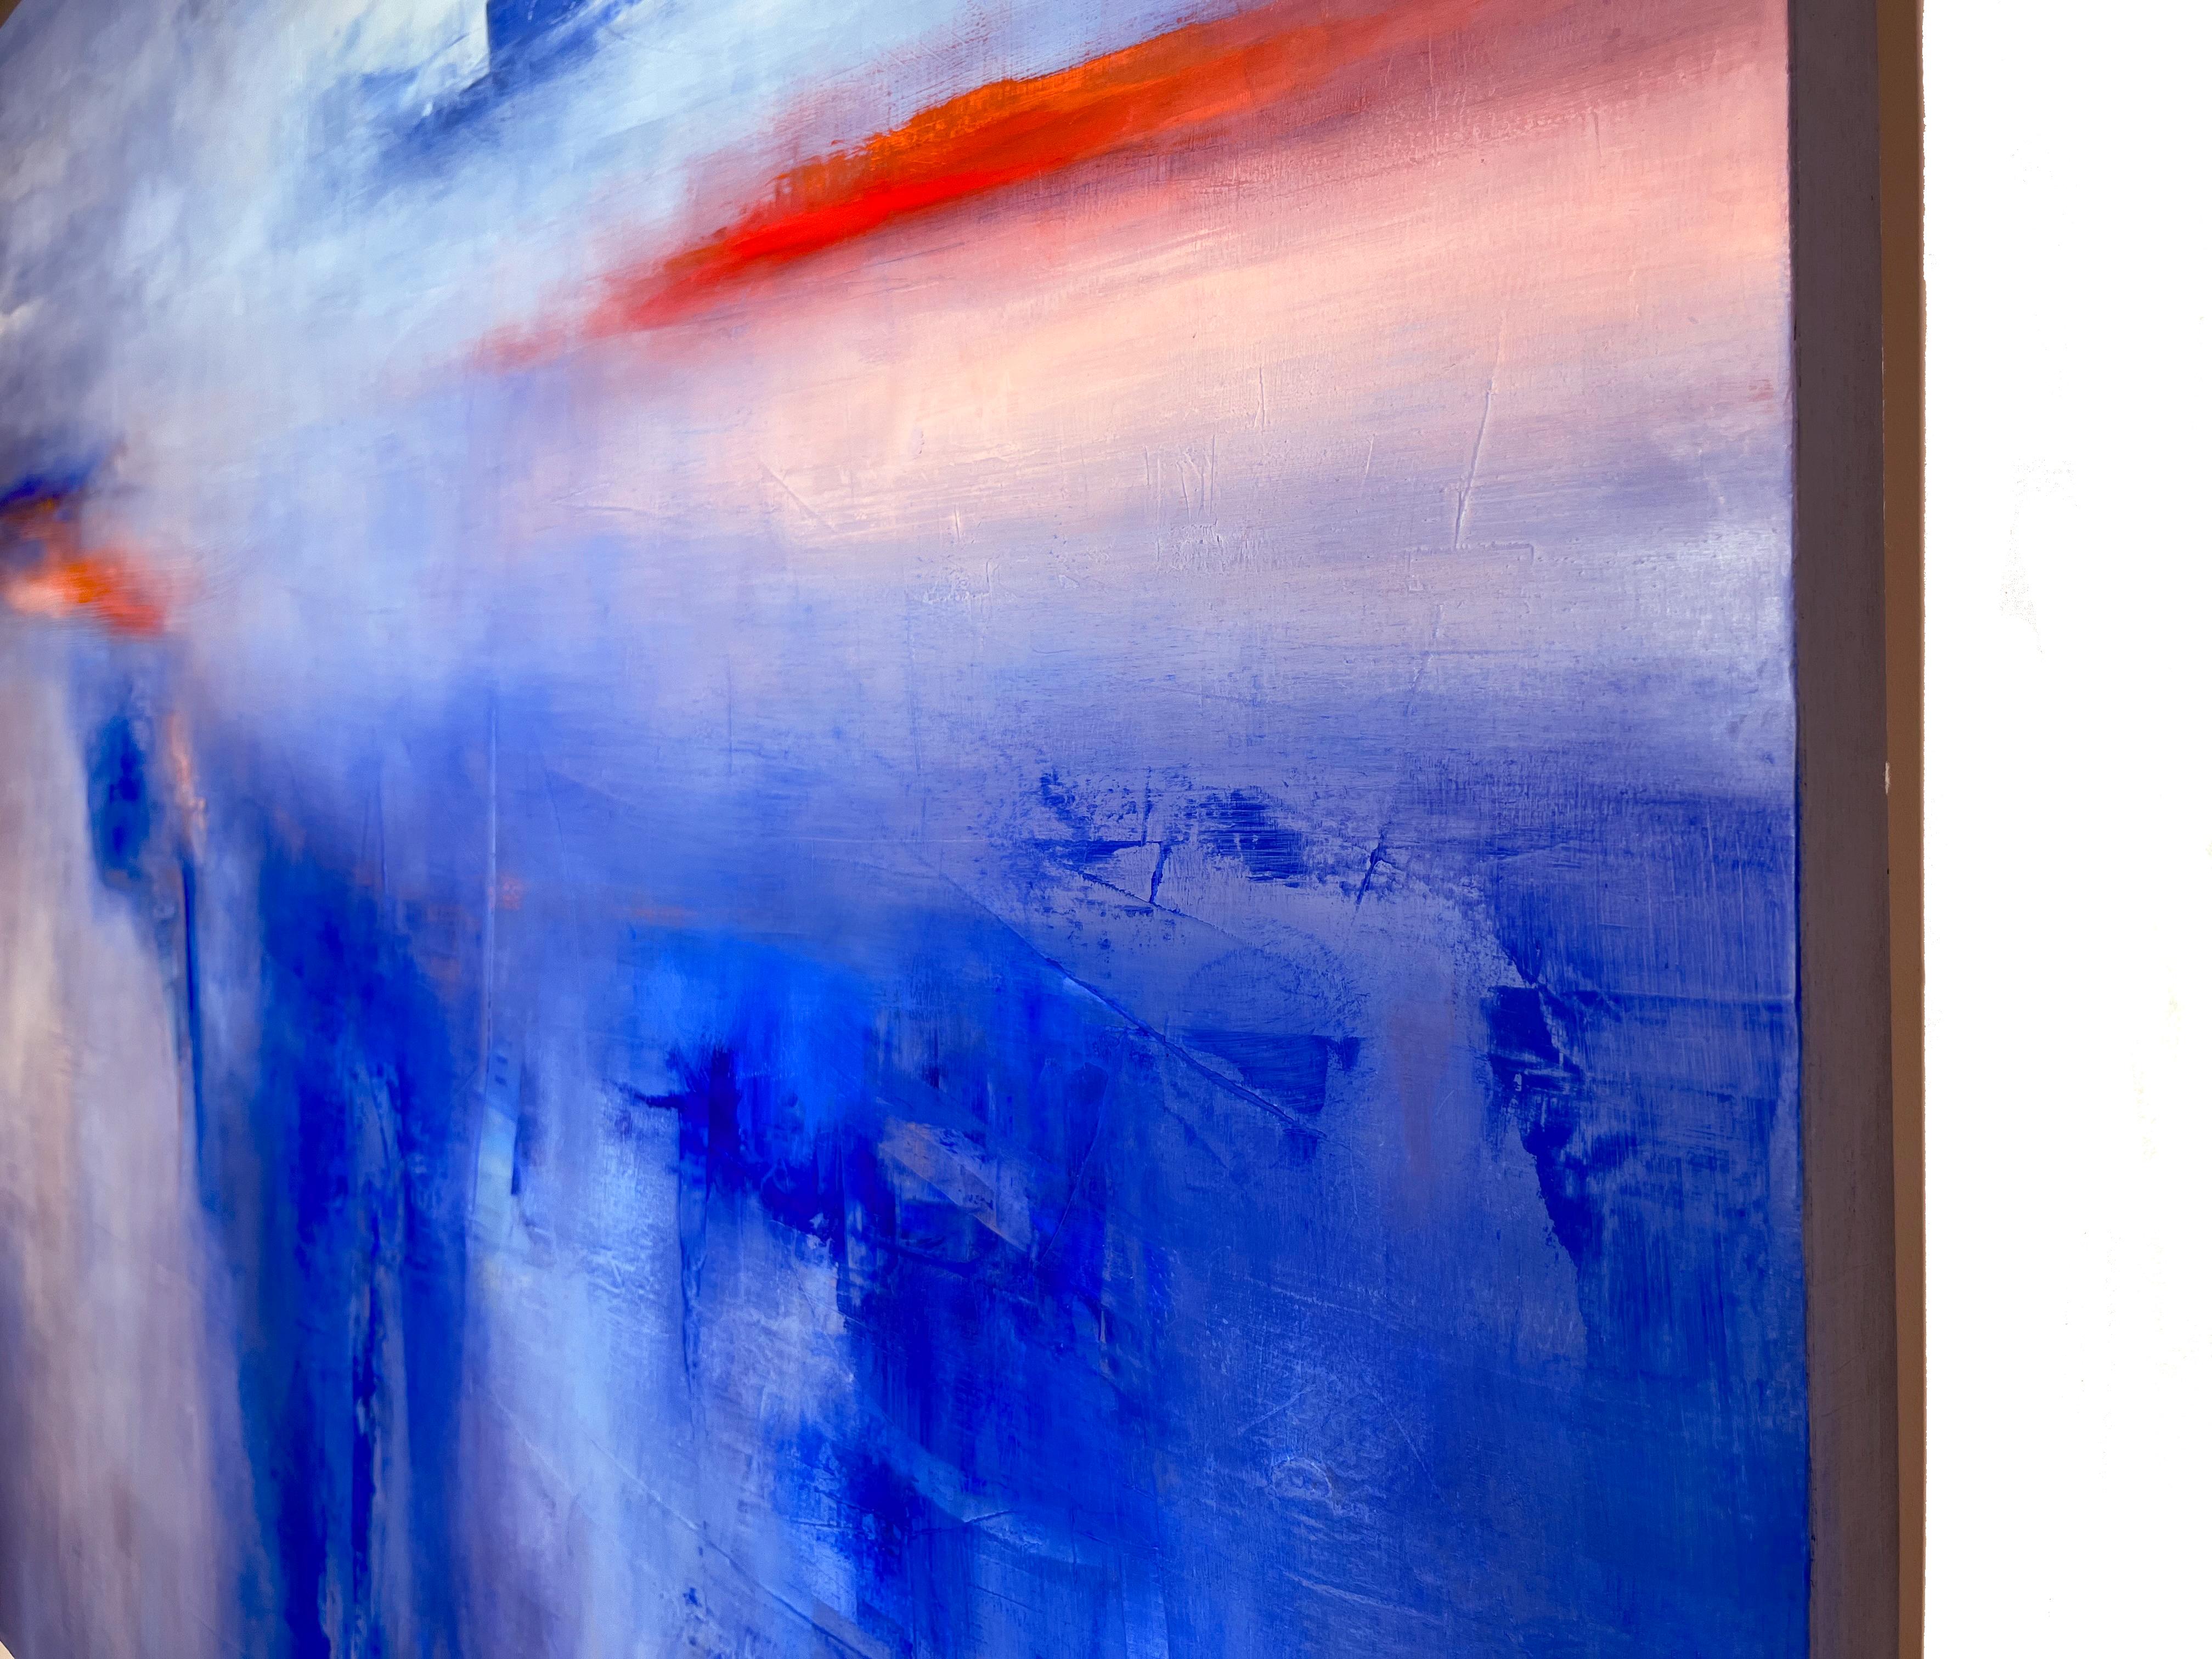 Deep Breath, bold abstract landscape with blue and red, oil & cold wax on panel - Painting by Tamara Soto